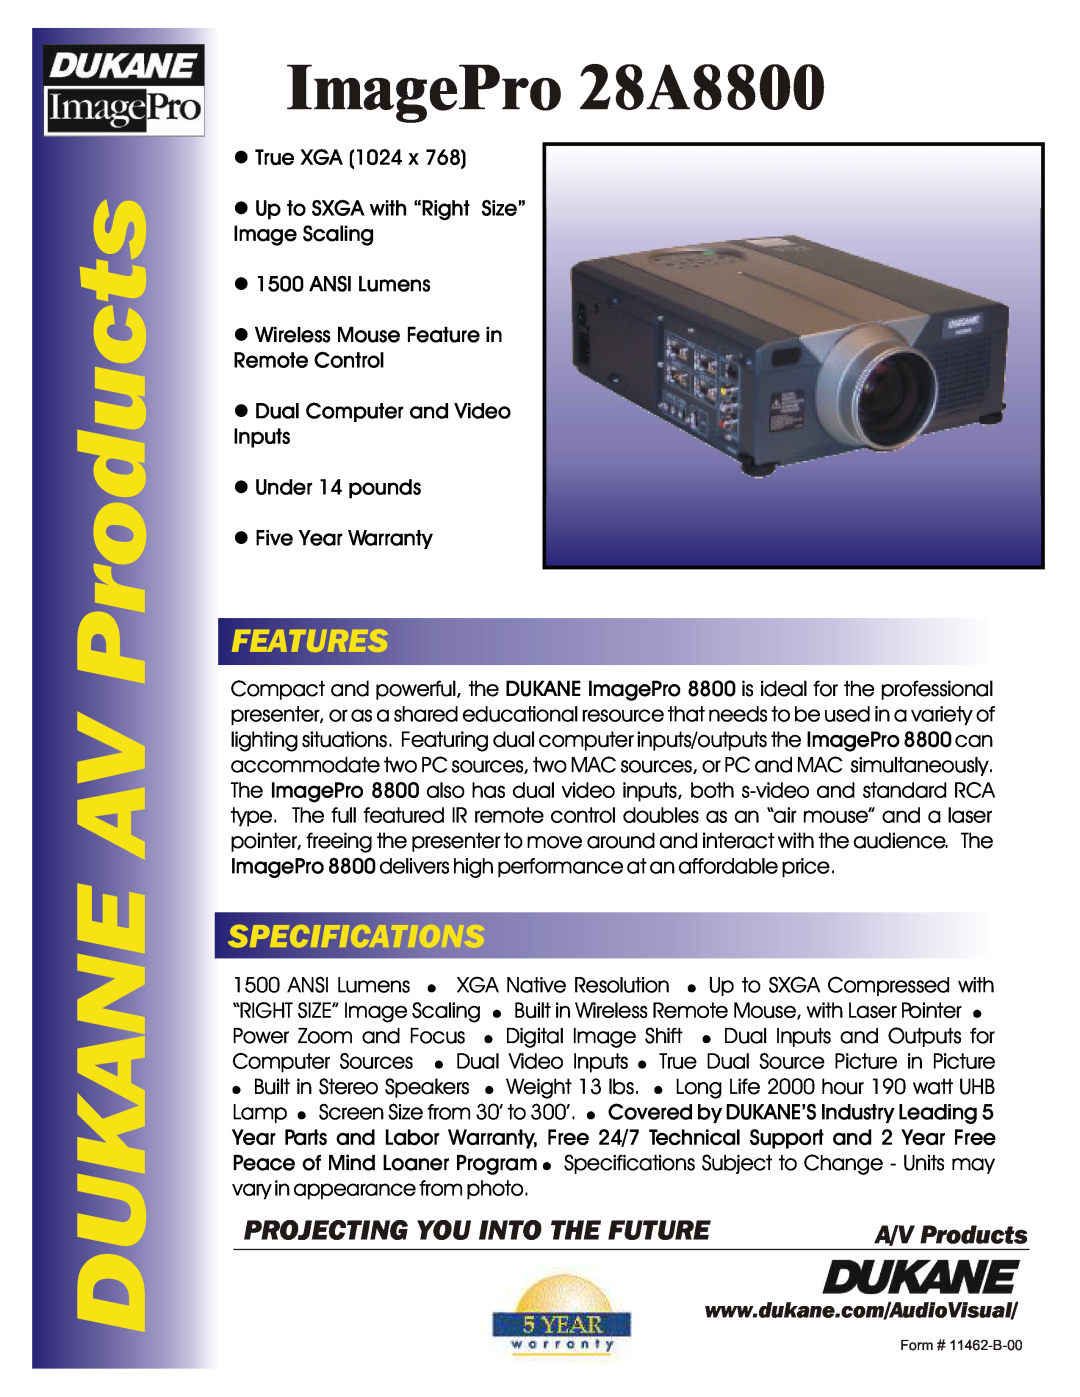 Dukane specifications DUKANE AV Products, ImagePro 28A8800, Features, Specifications 